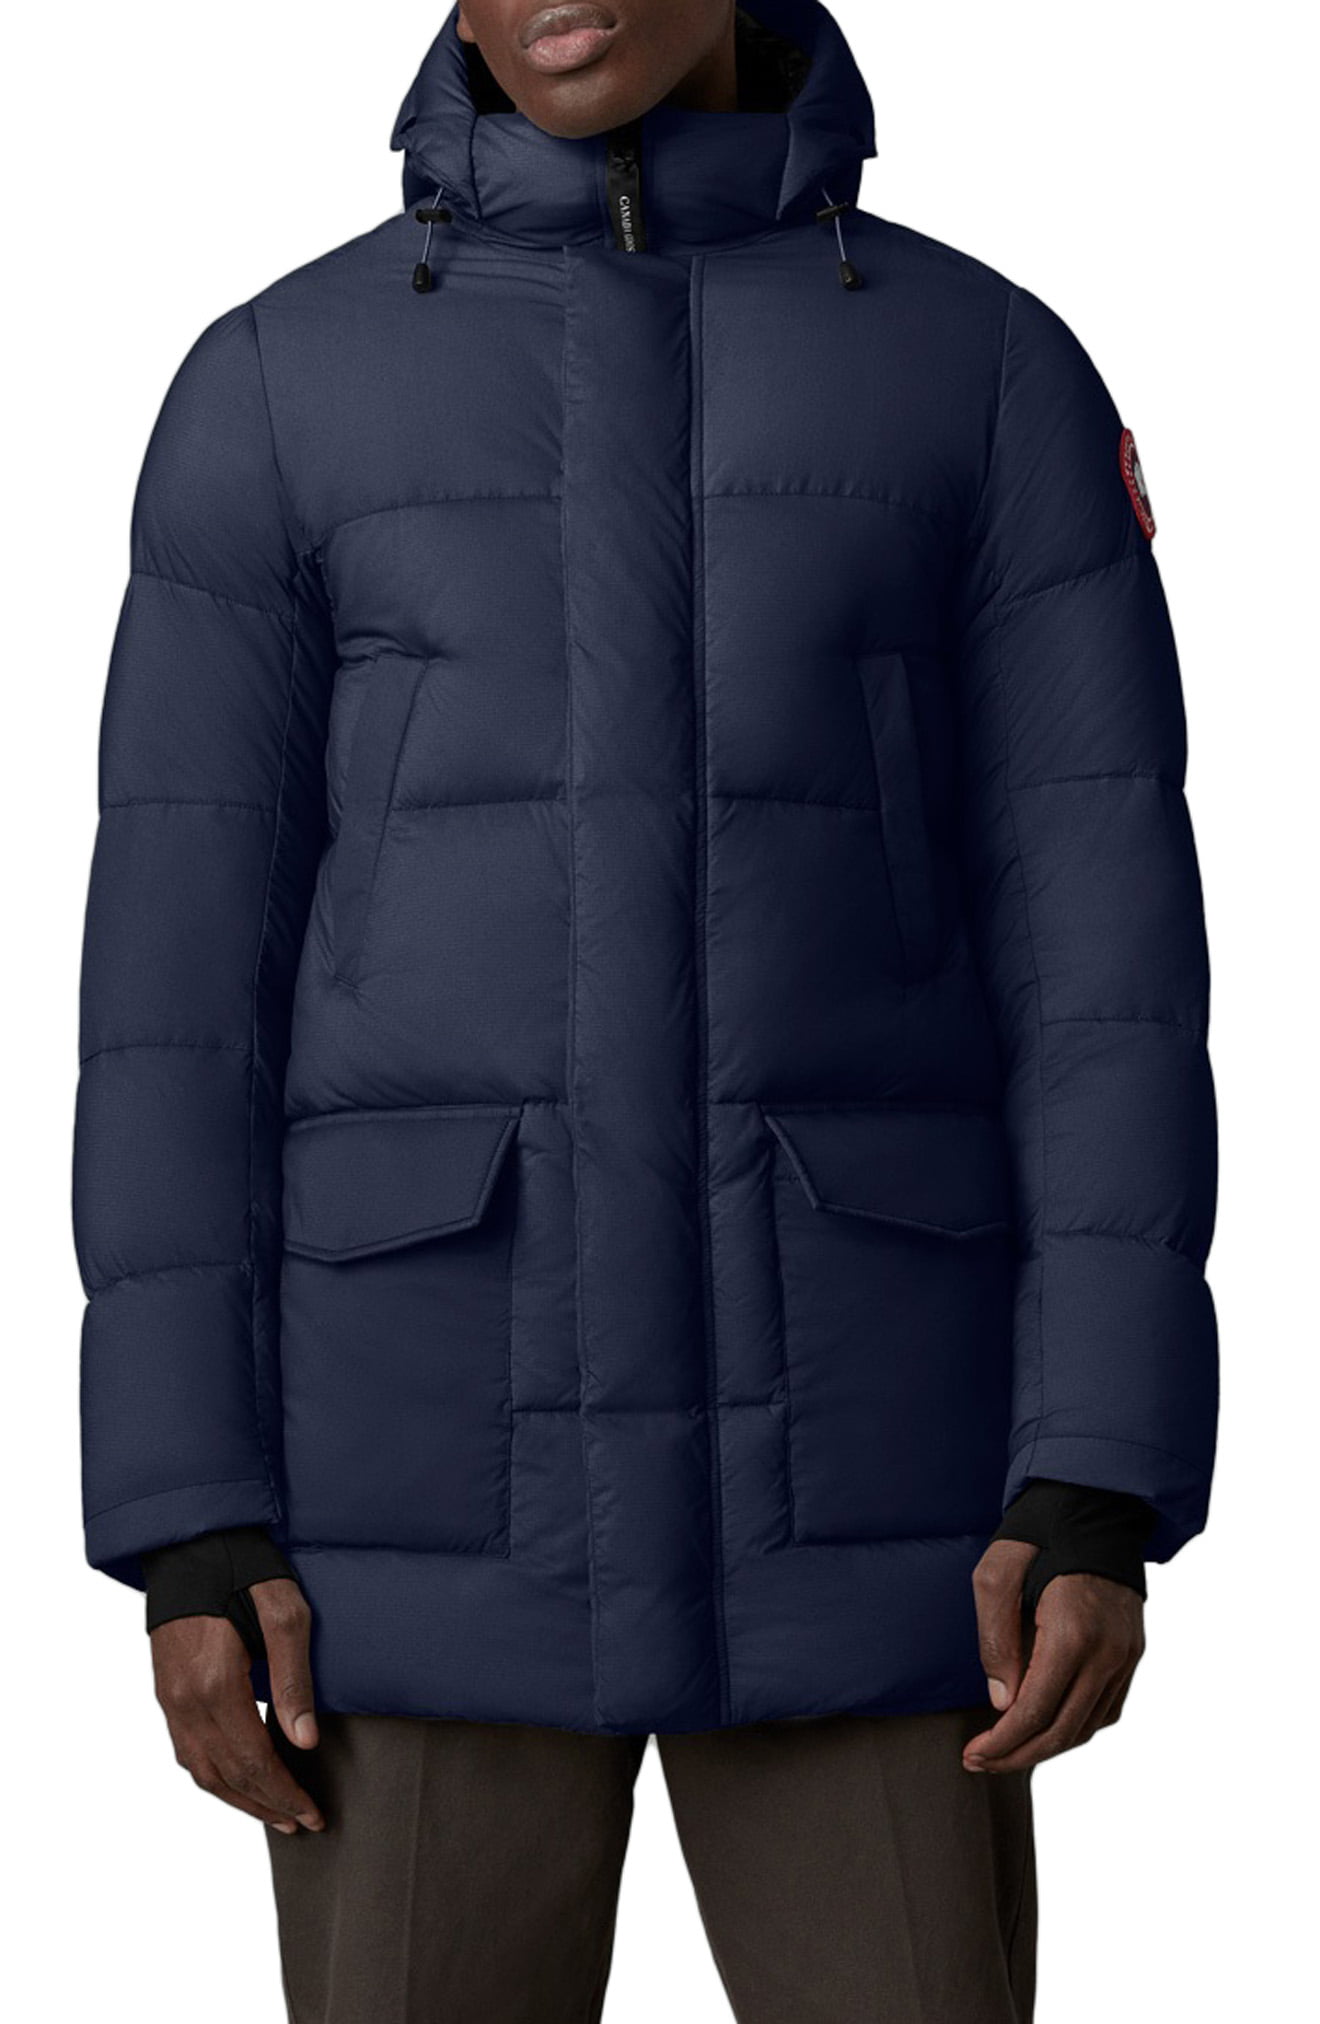 Men’s Canada Goose Armstrong 750 Fill Power Down Jacket, Size Medium ...